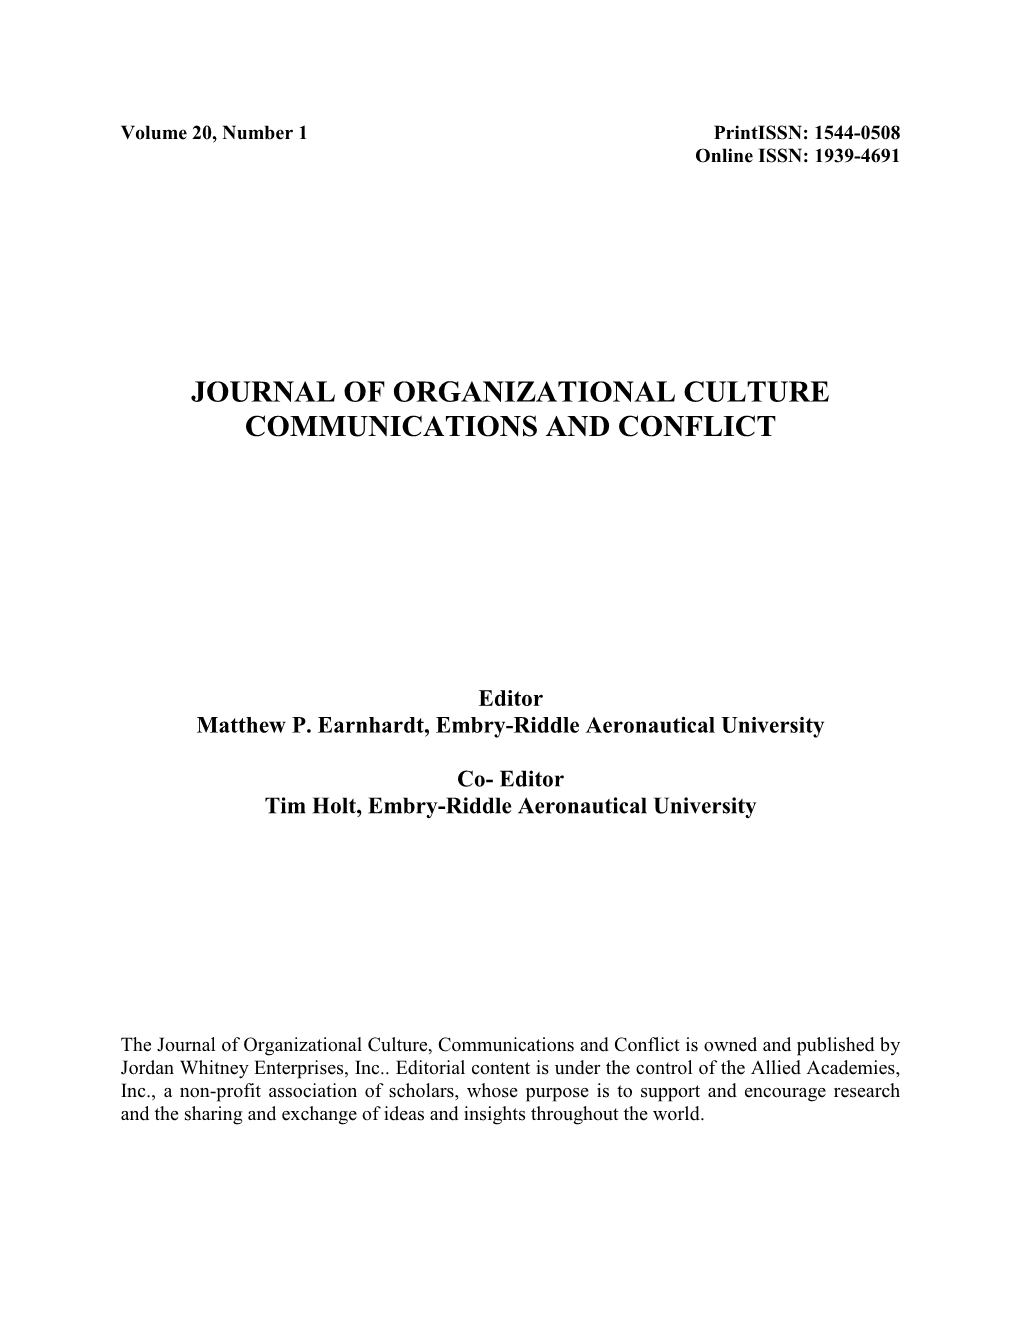 Journal of Organizational Culture Communications and Conflict